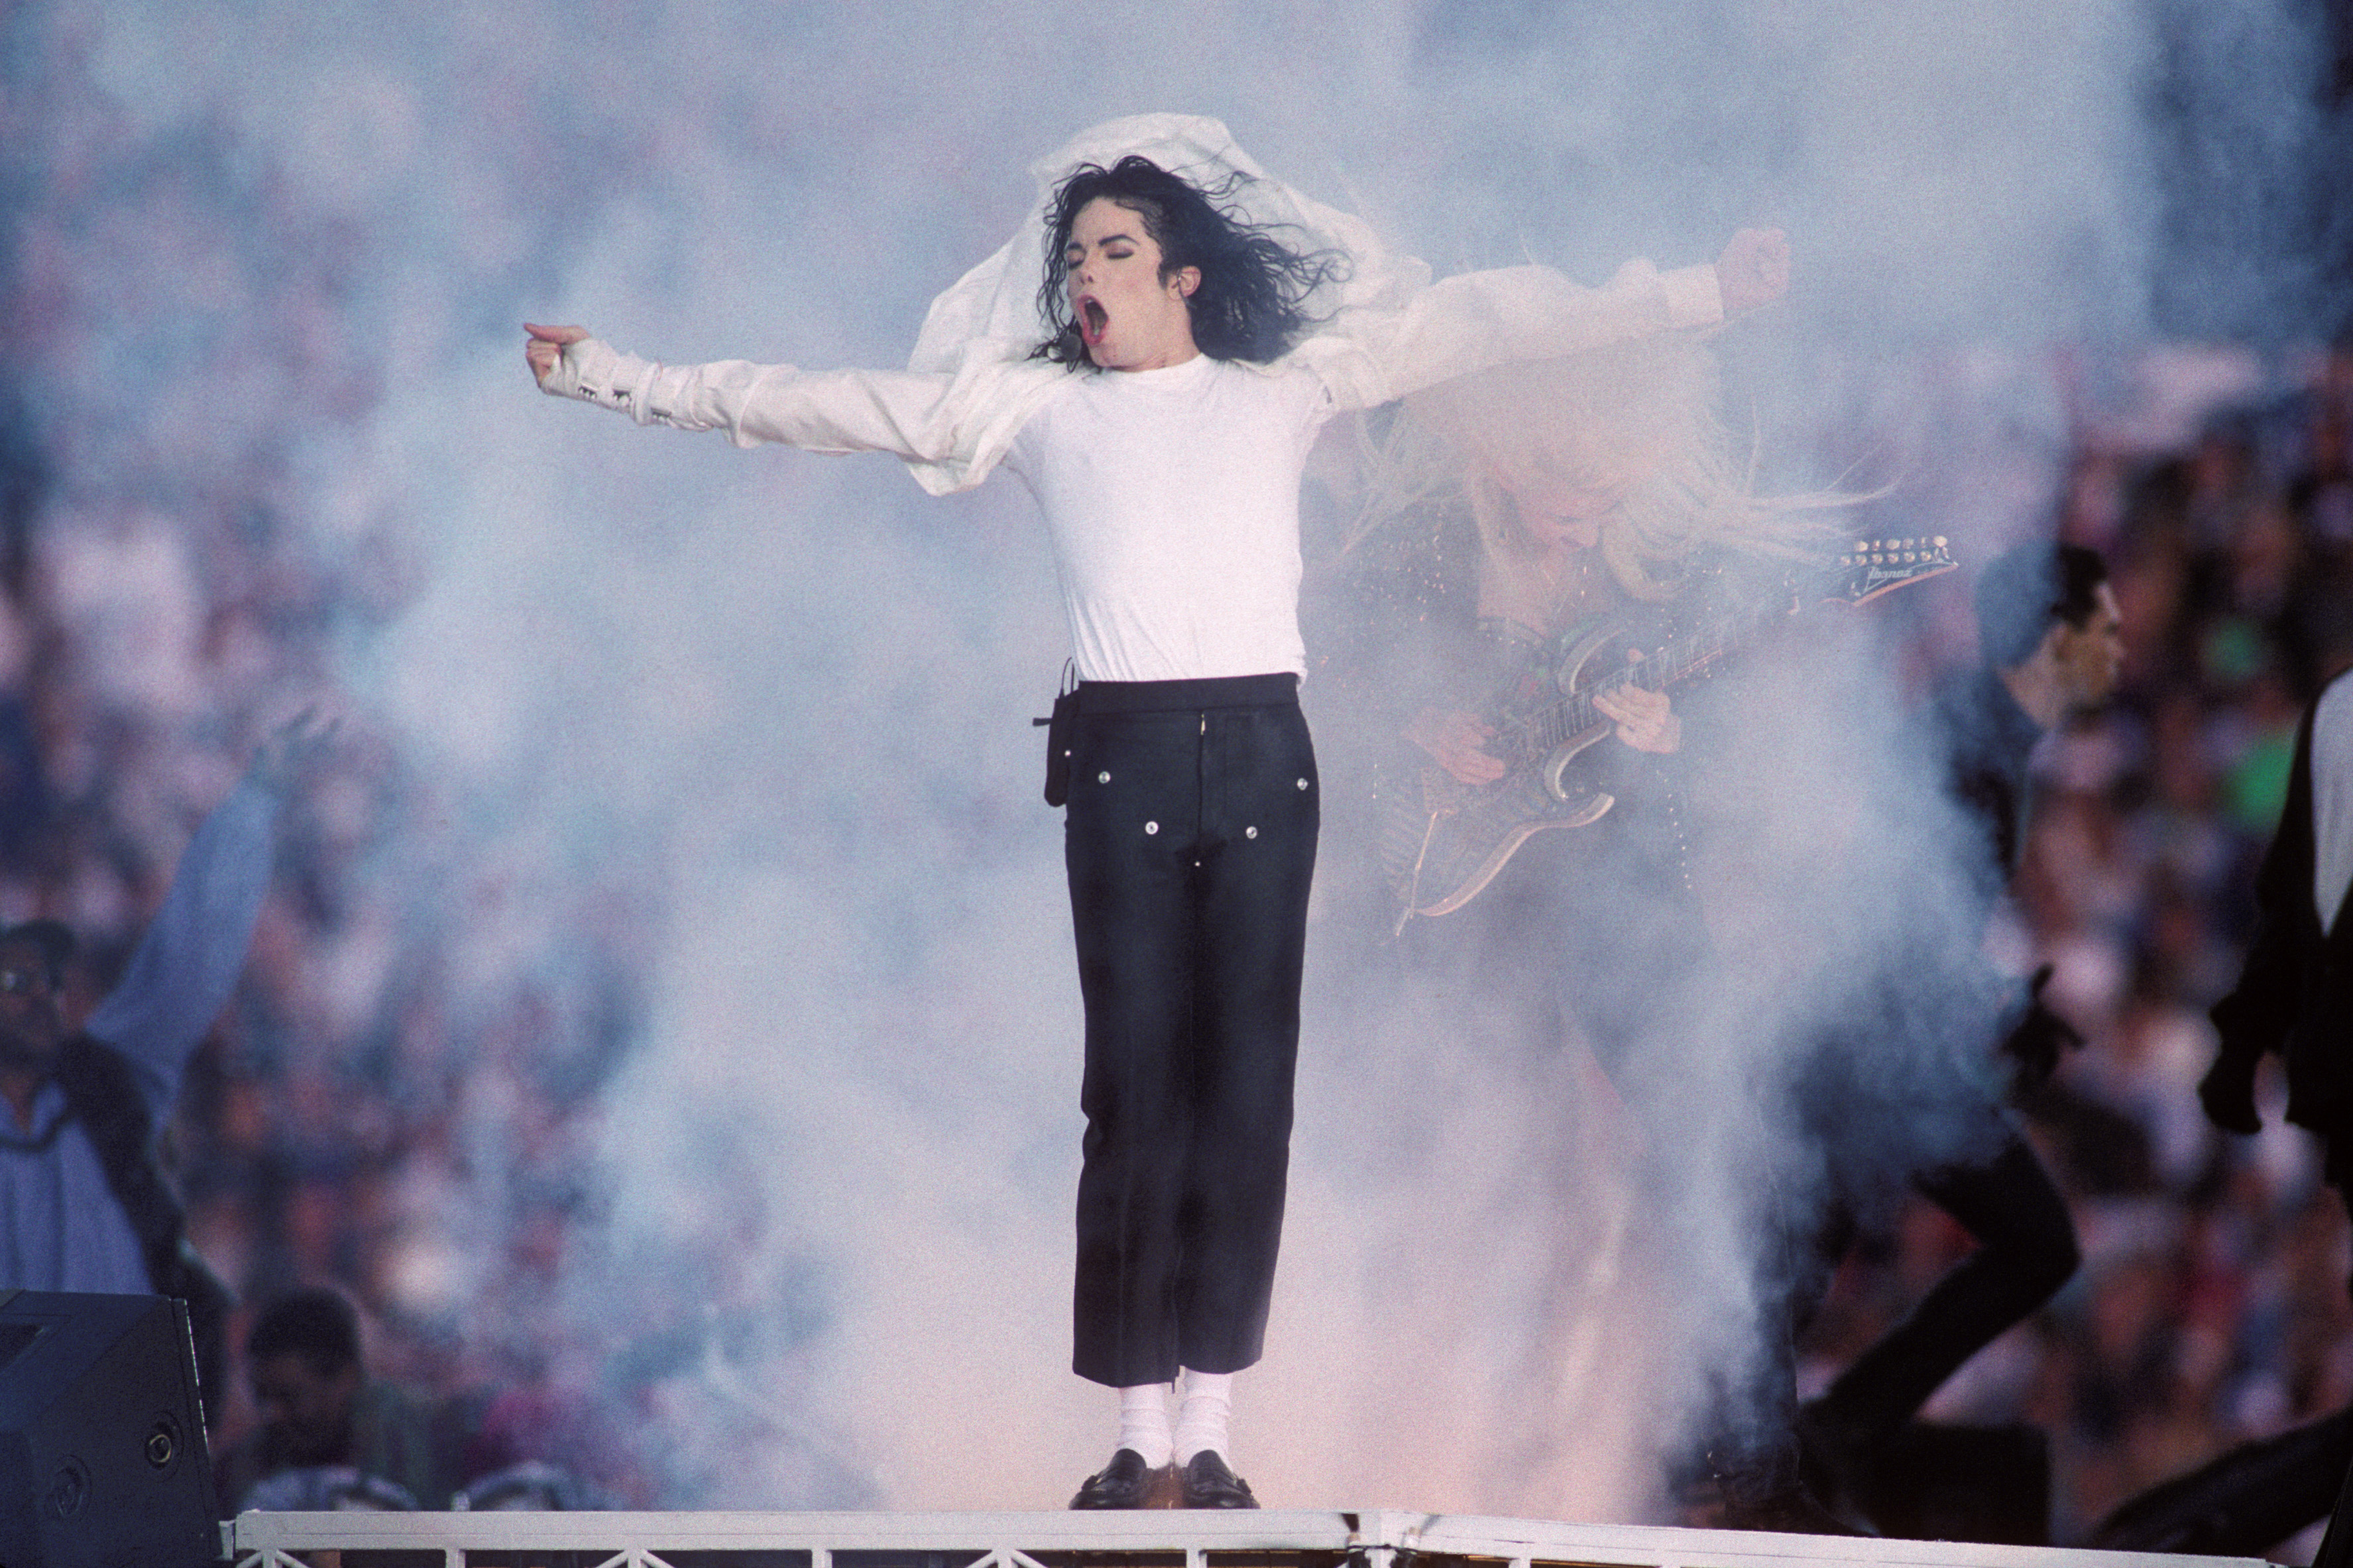 Michael Jackson performing at the Super Bowl XXVII Halftime show in Pasadena, California on January 31, 1993 | Source: Getty Images